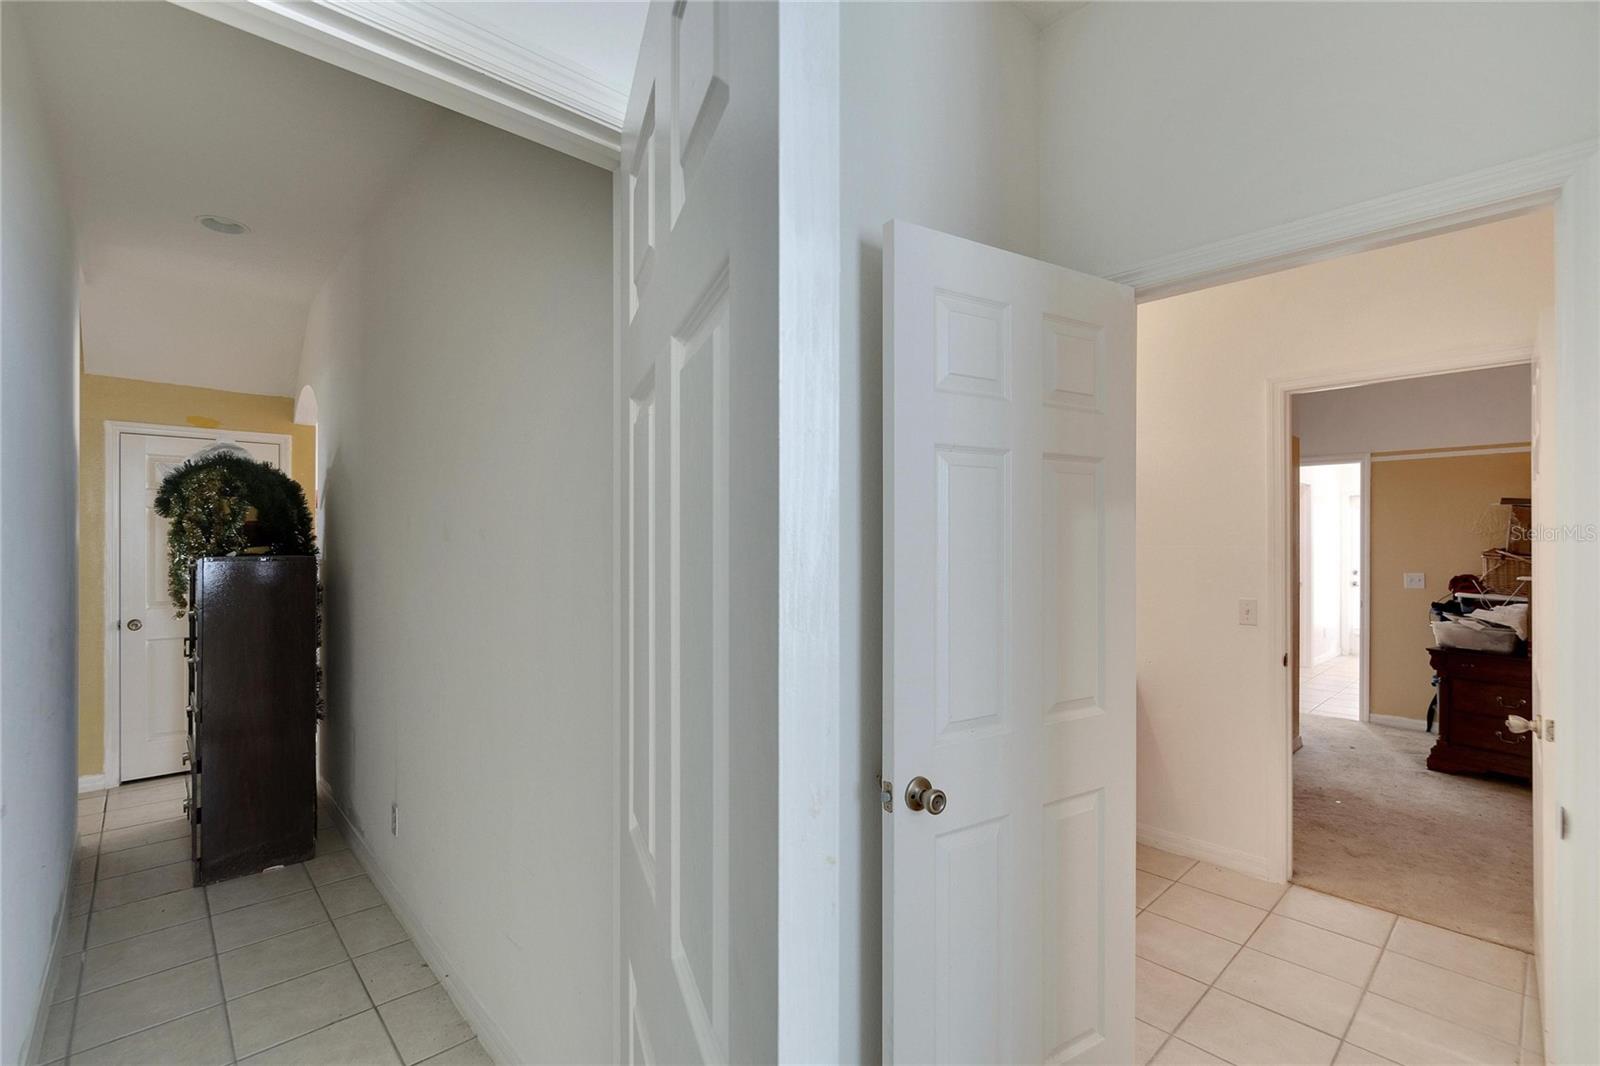 Separate entry way into Bedroom (3) [Linen Closet across the hall off the kitchen]